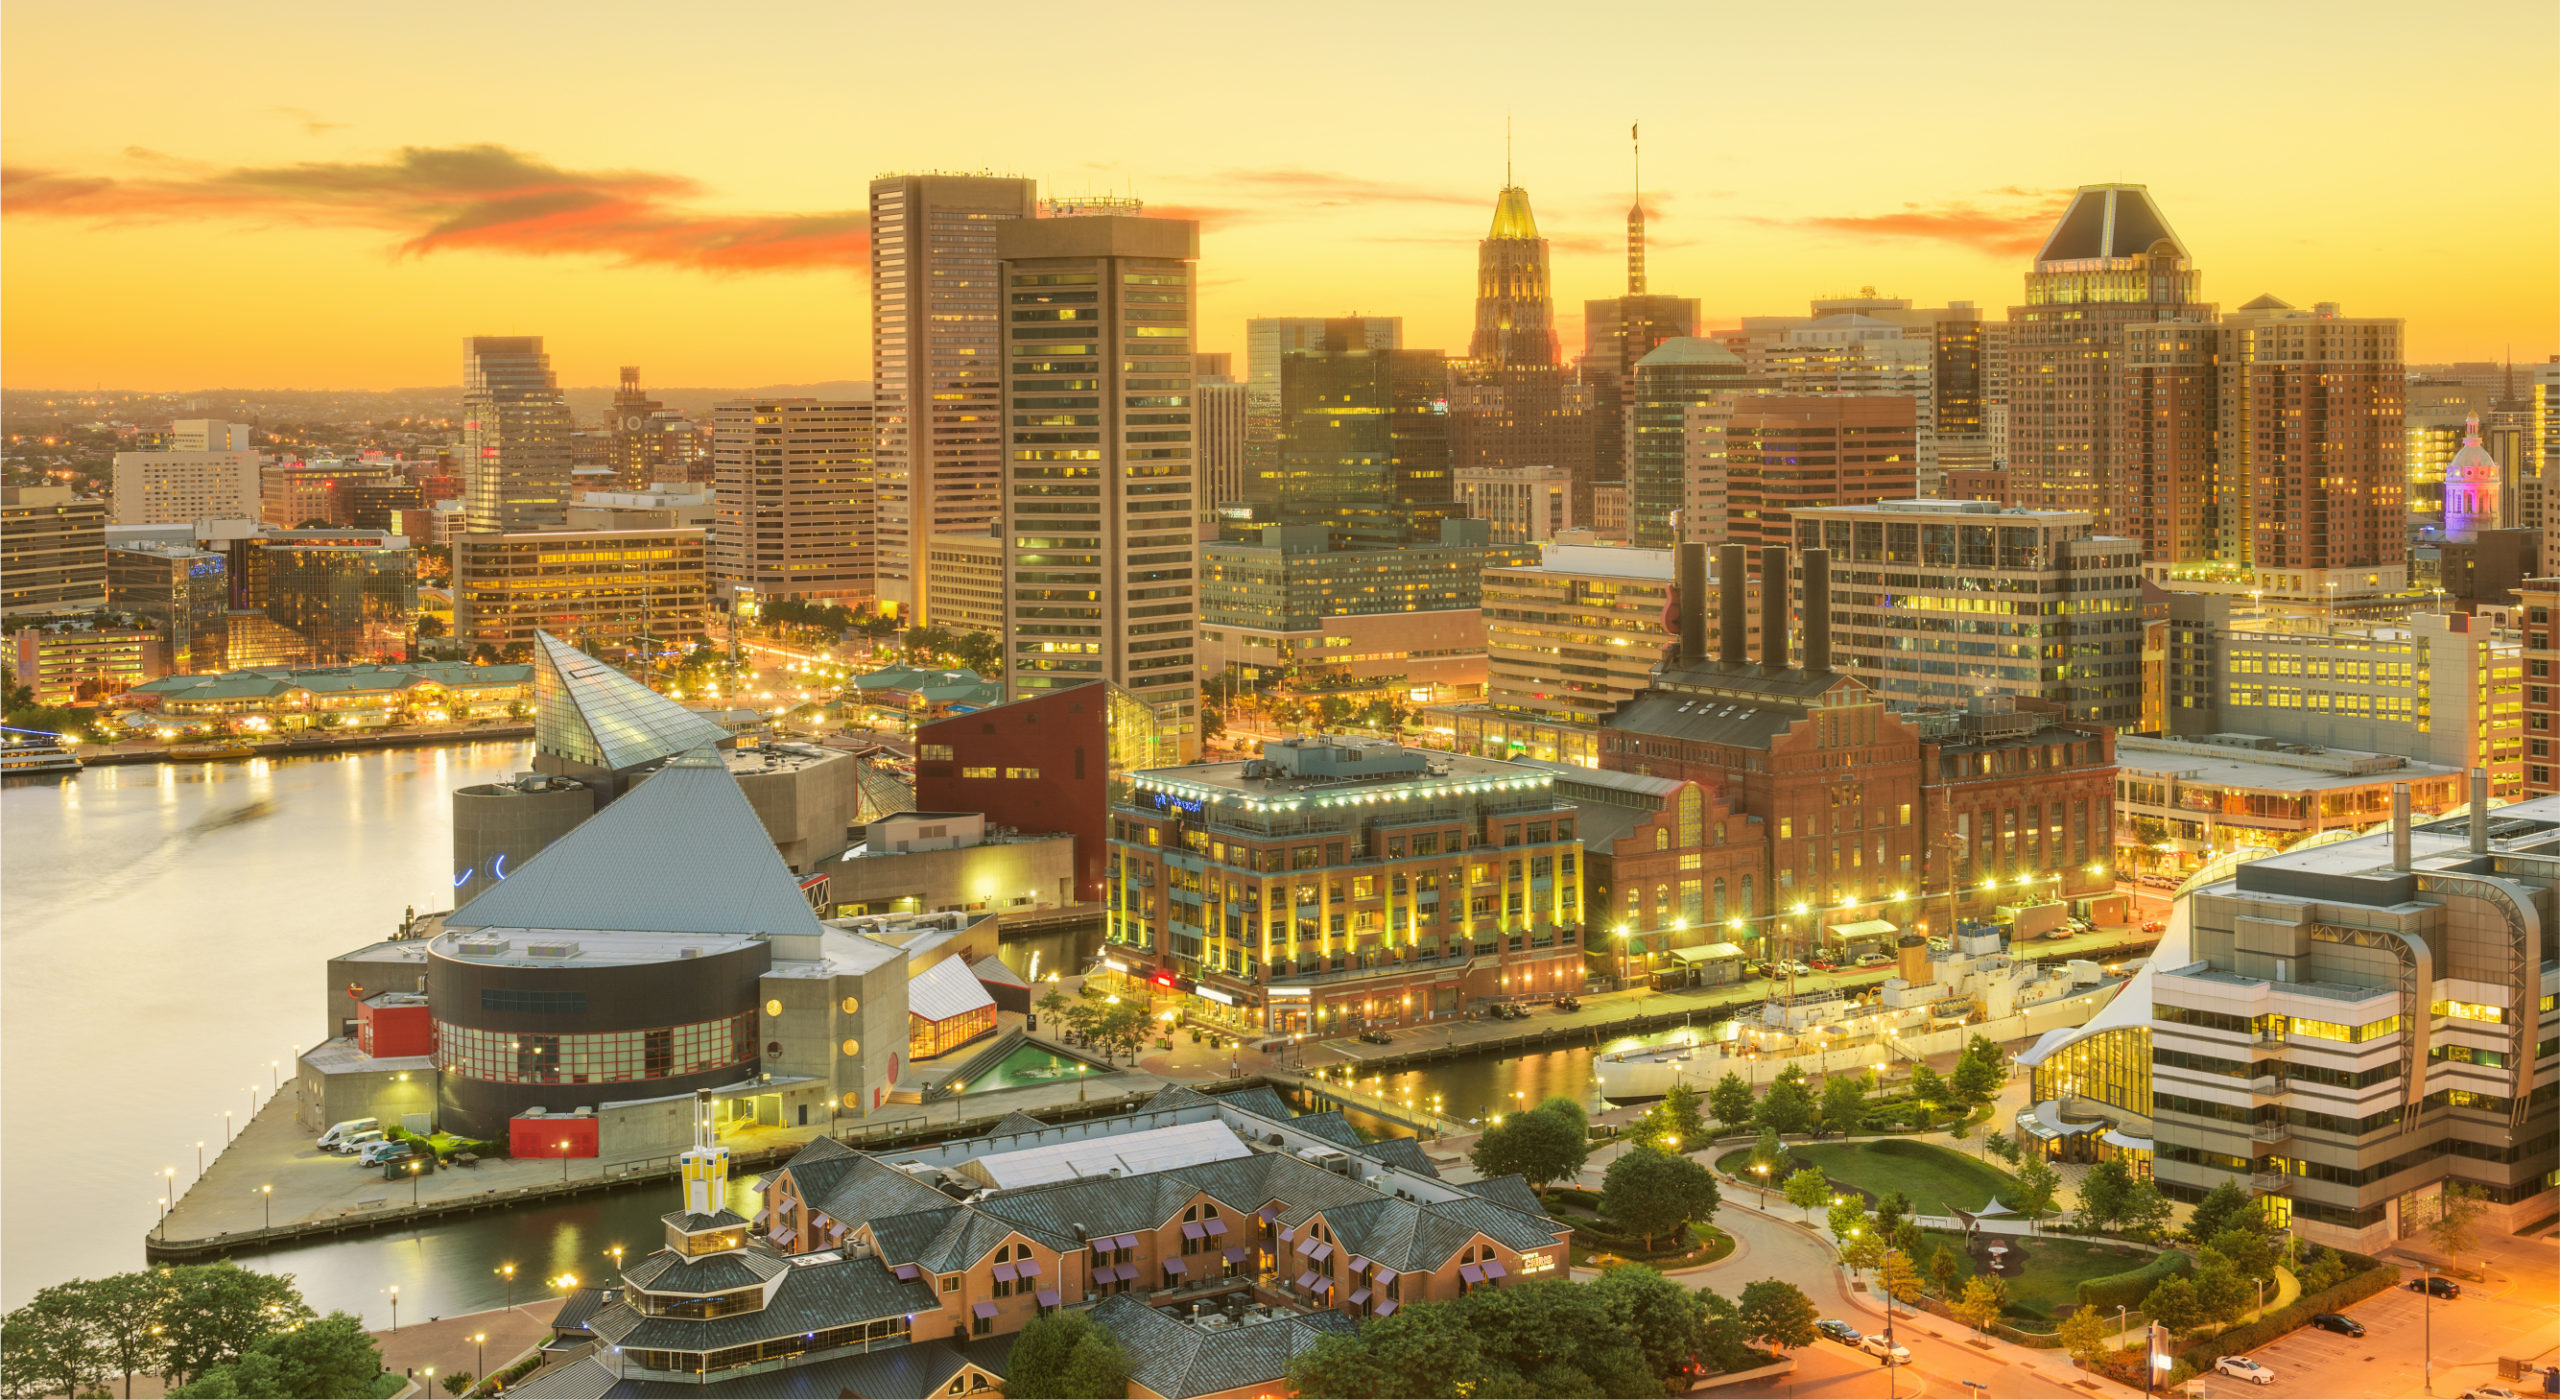 Best Things to Do in Baltimore